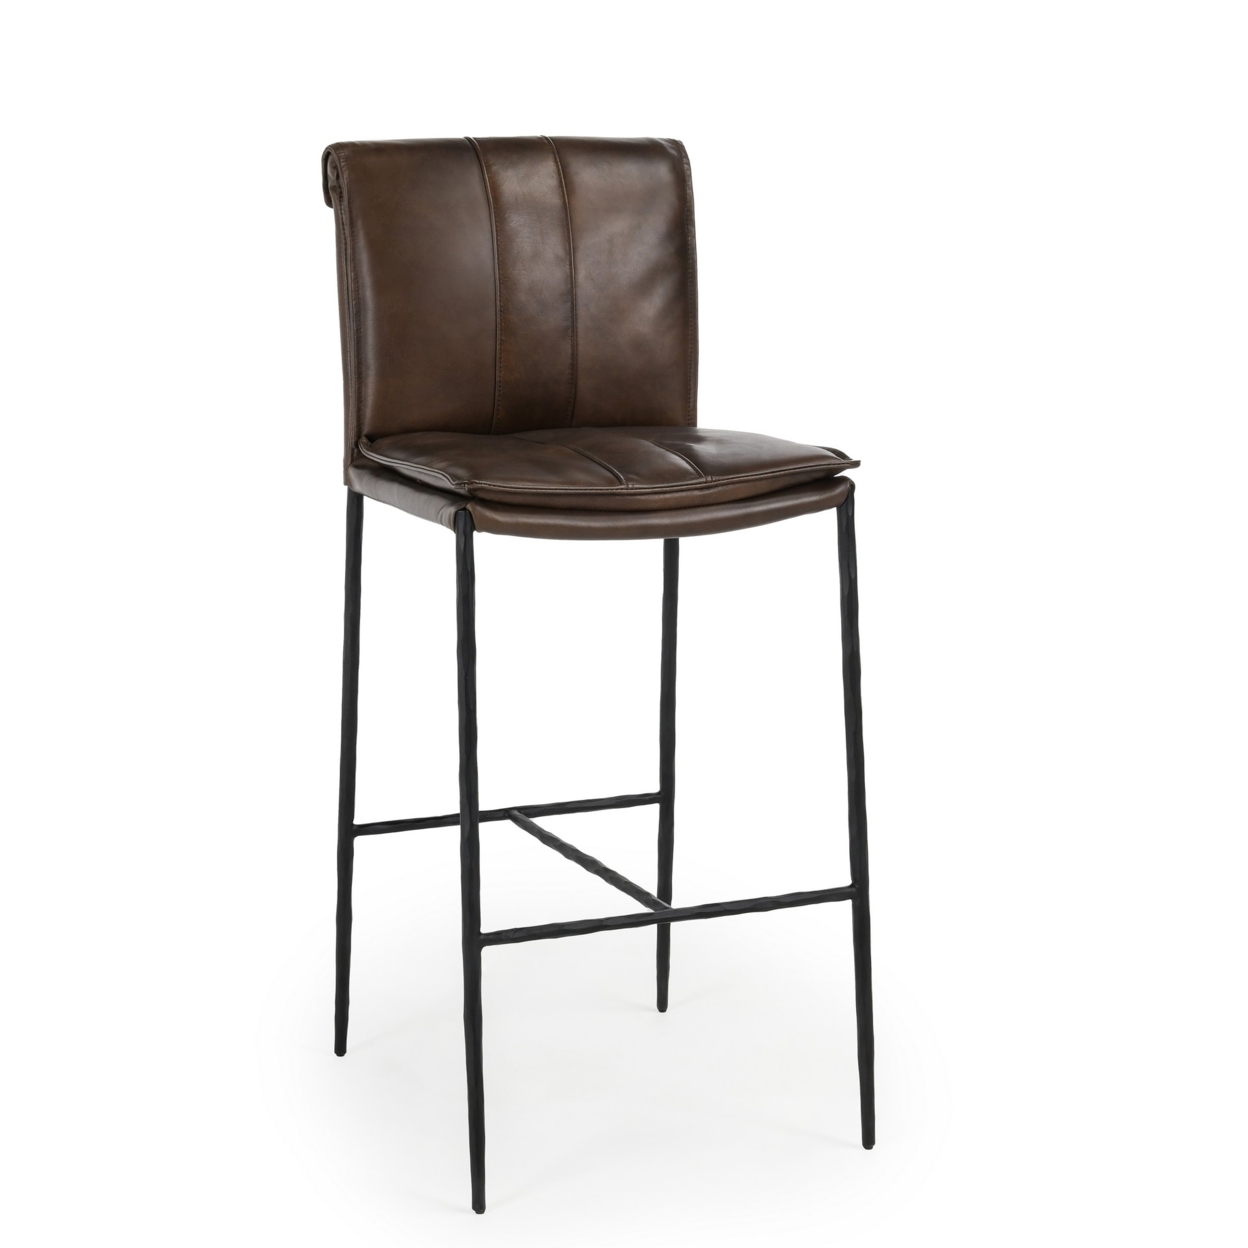 Iva 31 Inch Bar Stool Chair, Padded, Rolled Back, Brown Top Grain Leather- Saltoro Sherpi